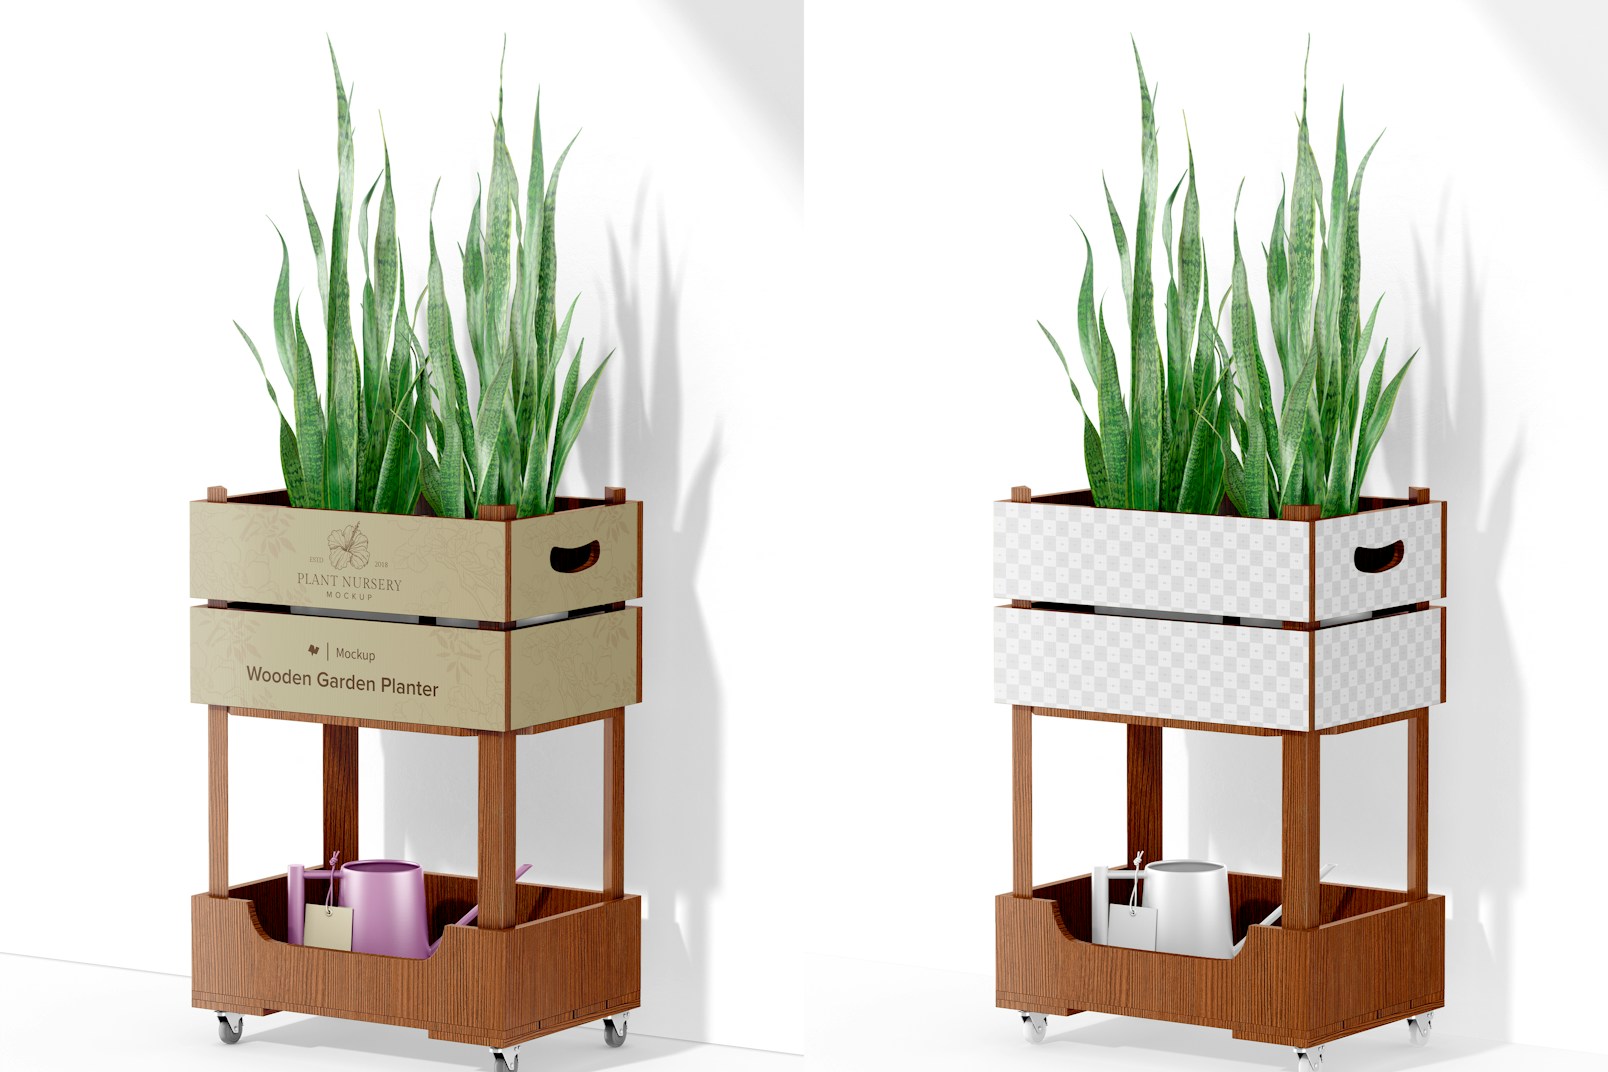 Wooden Garden Planter Mockup, with Watering Can